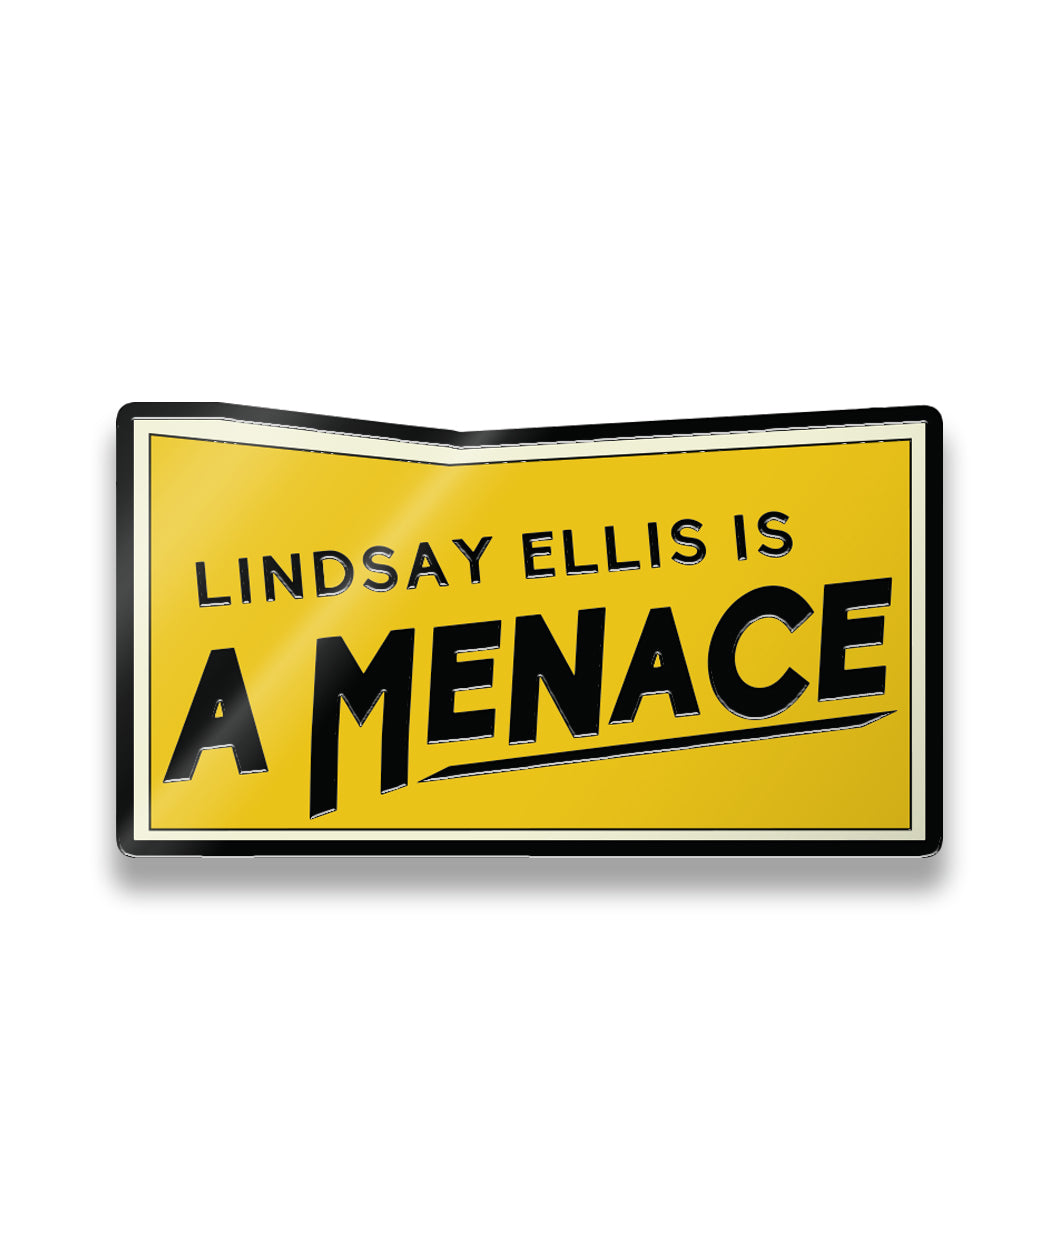 Black and white outline rectangle pin with yellow fill. Top of rectangle is bent inwards. “Linsay Ellis is a menace” is in black sans serif font angled from bottom left to top right. Black line is under “menace” - from Lindsay Ellis